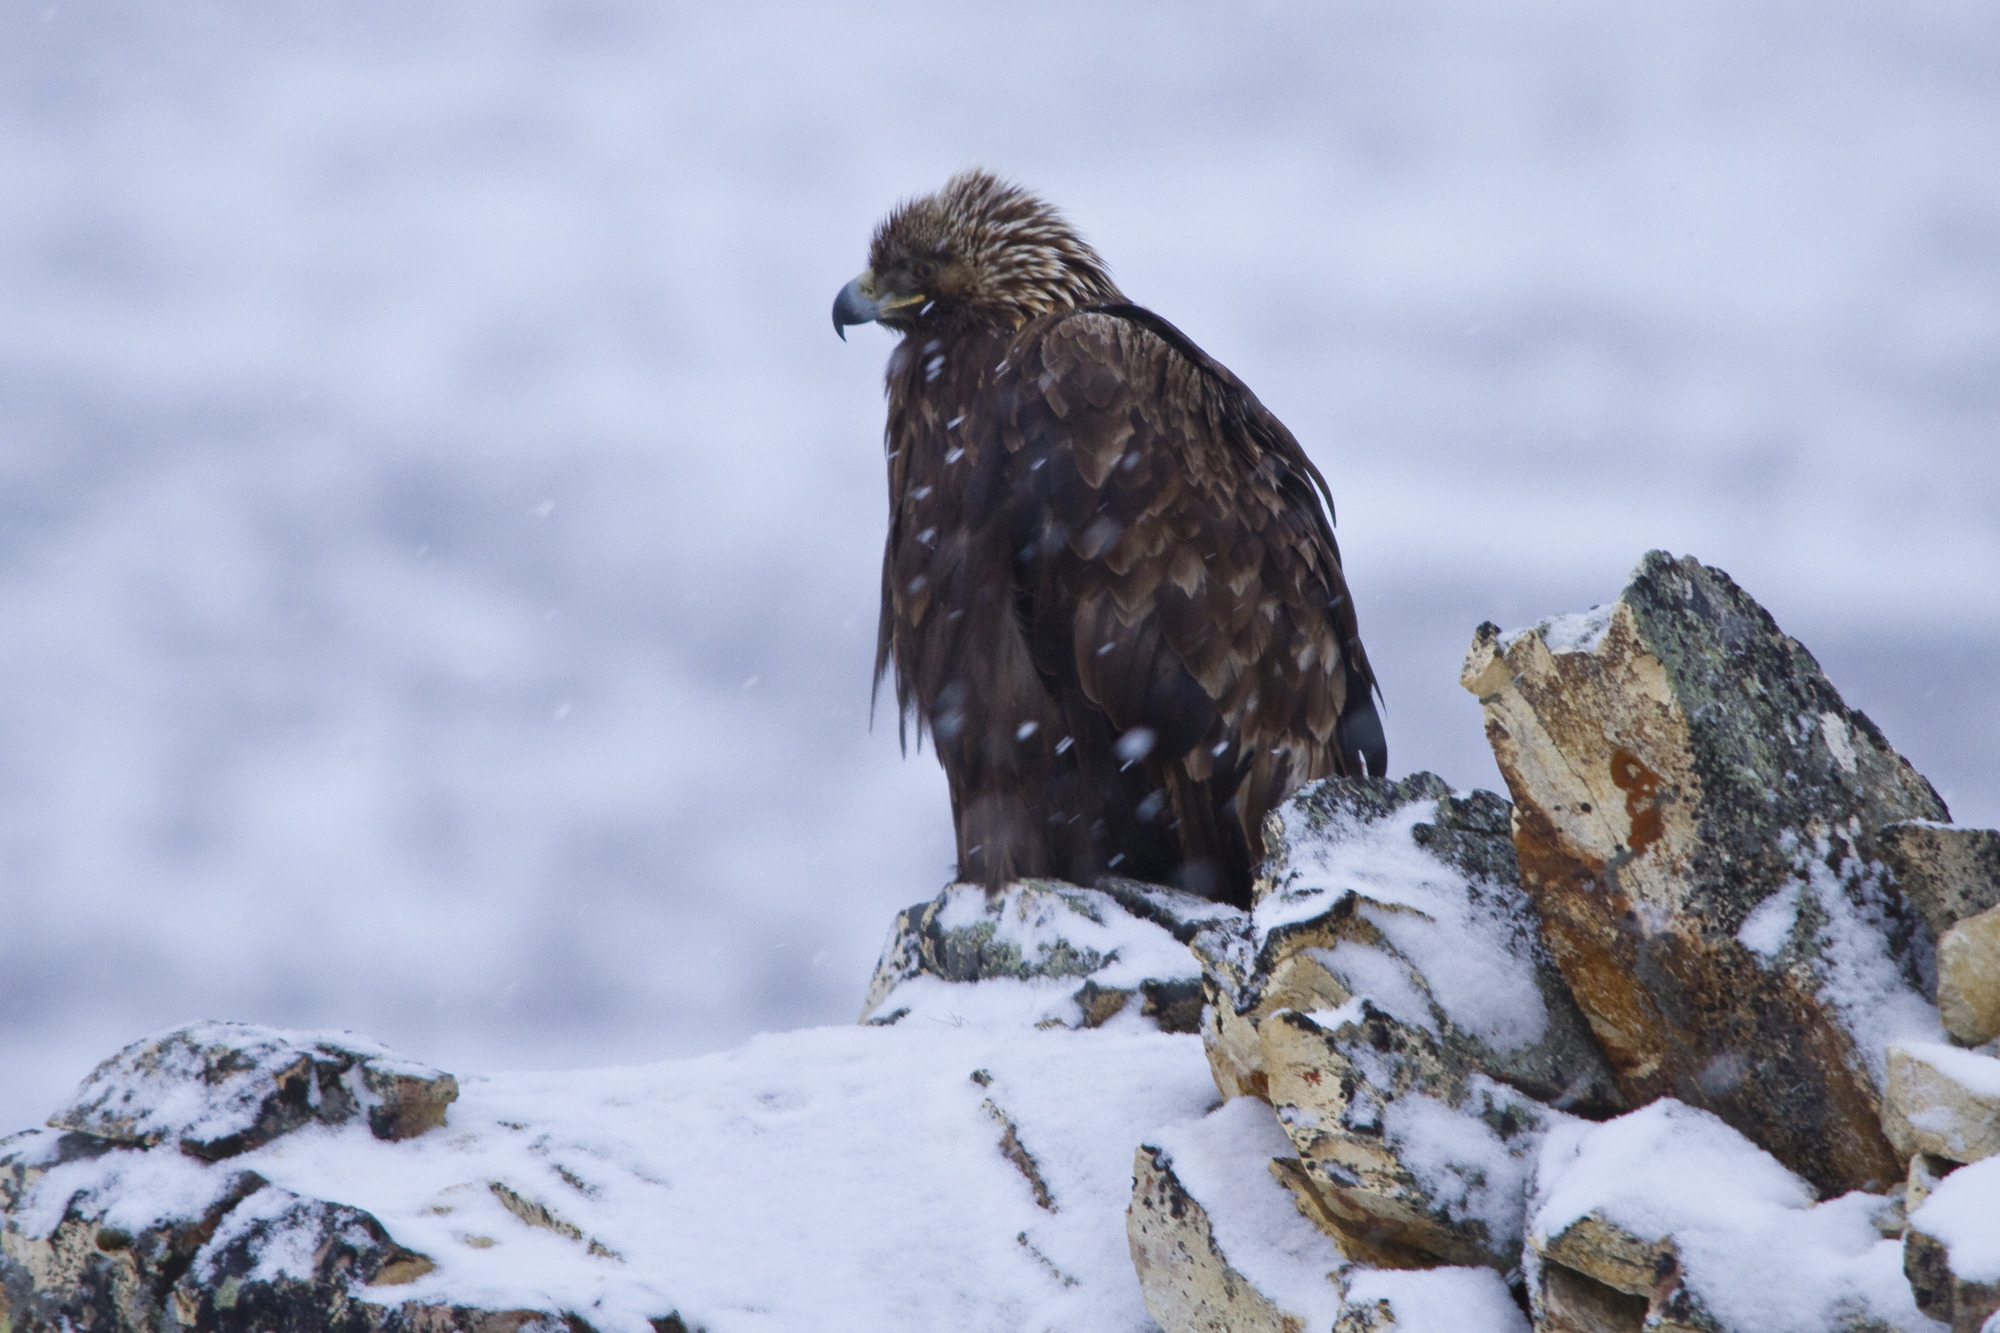 A golden eagle, feathers ruffled against the falling snow, perches on a rocky outcropping atop a mountain